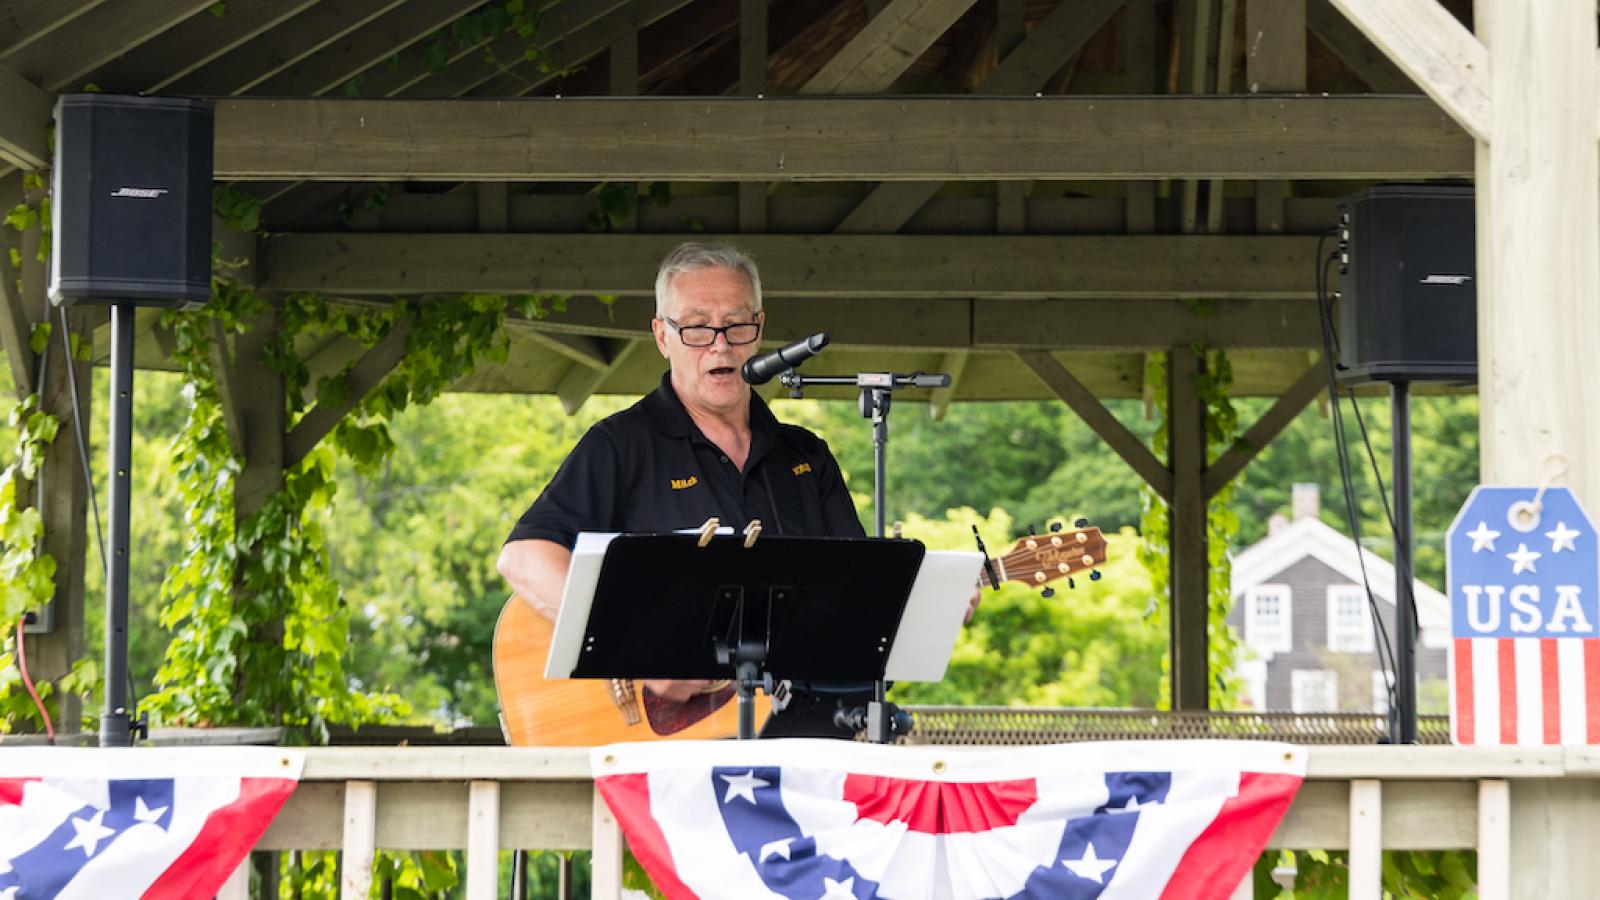 A man playing an acoustic guitar outside, under a gazebo. An American flag banner is draped over the railing.